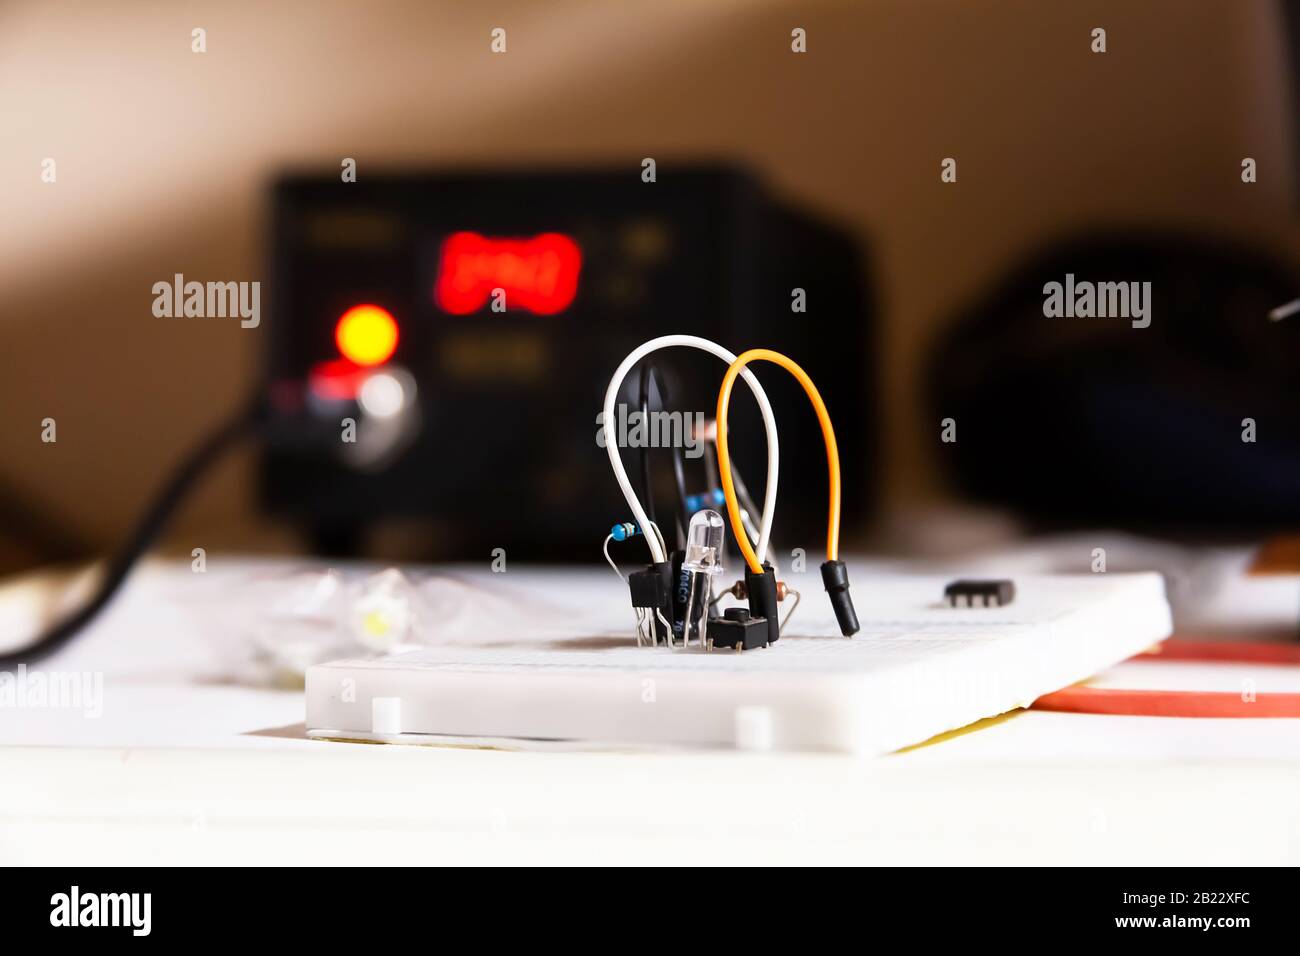 Simple electric circuit, white breadboard with electrical components, wires, diode, resistors, soldering station in the background, project Stock Photo